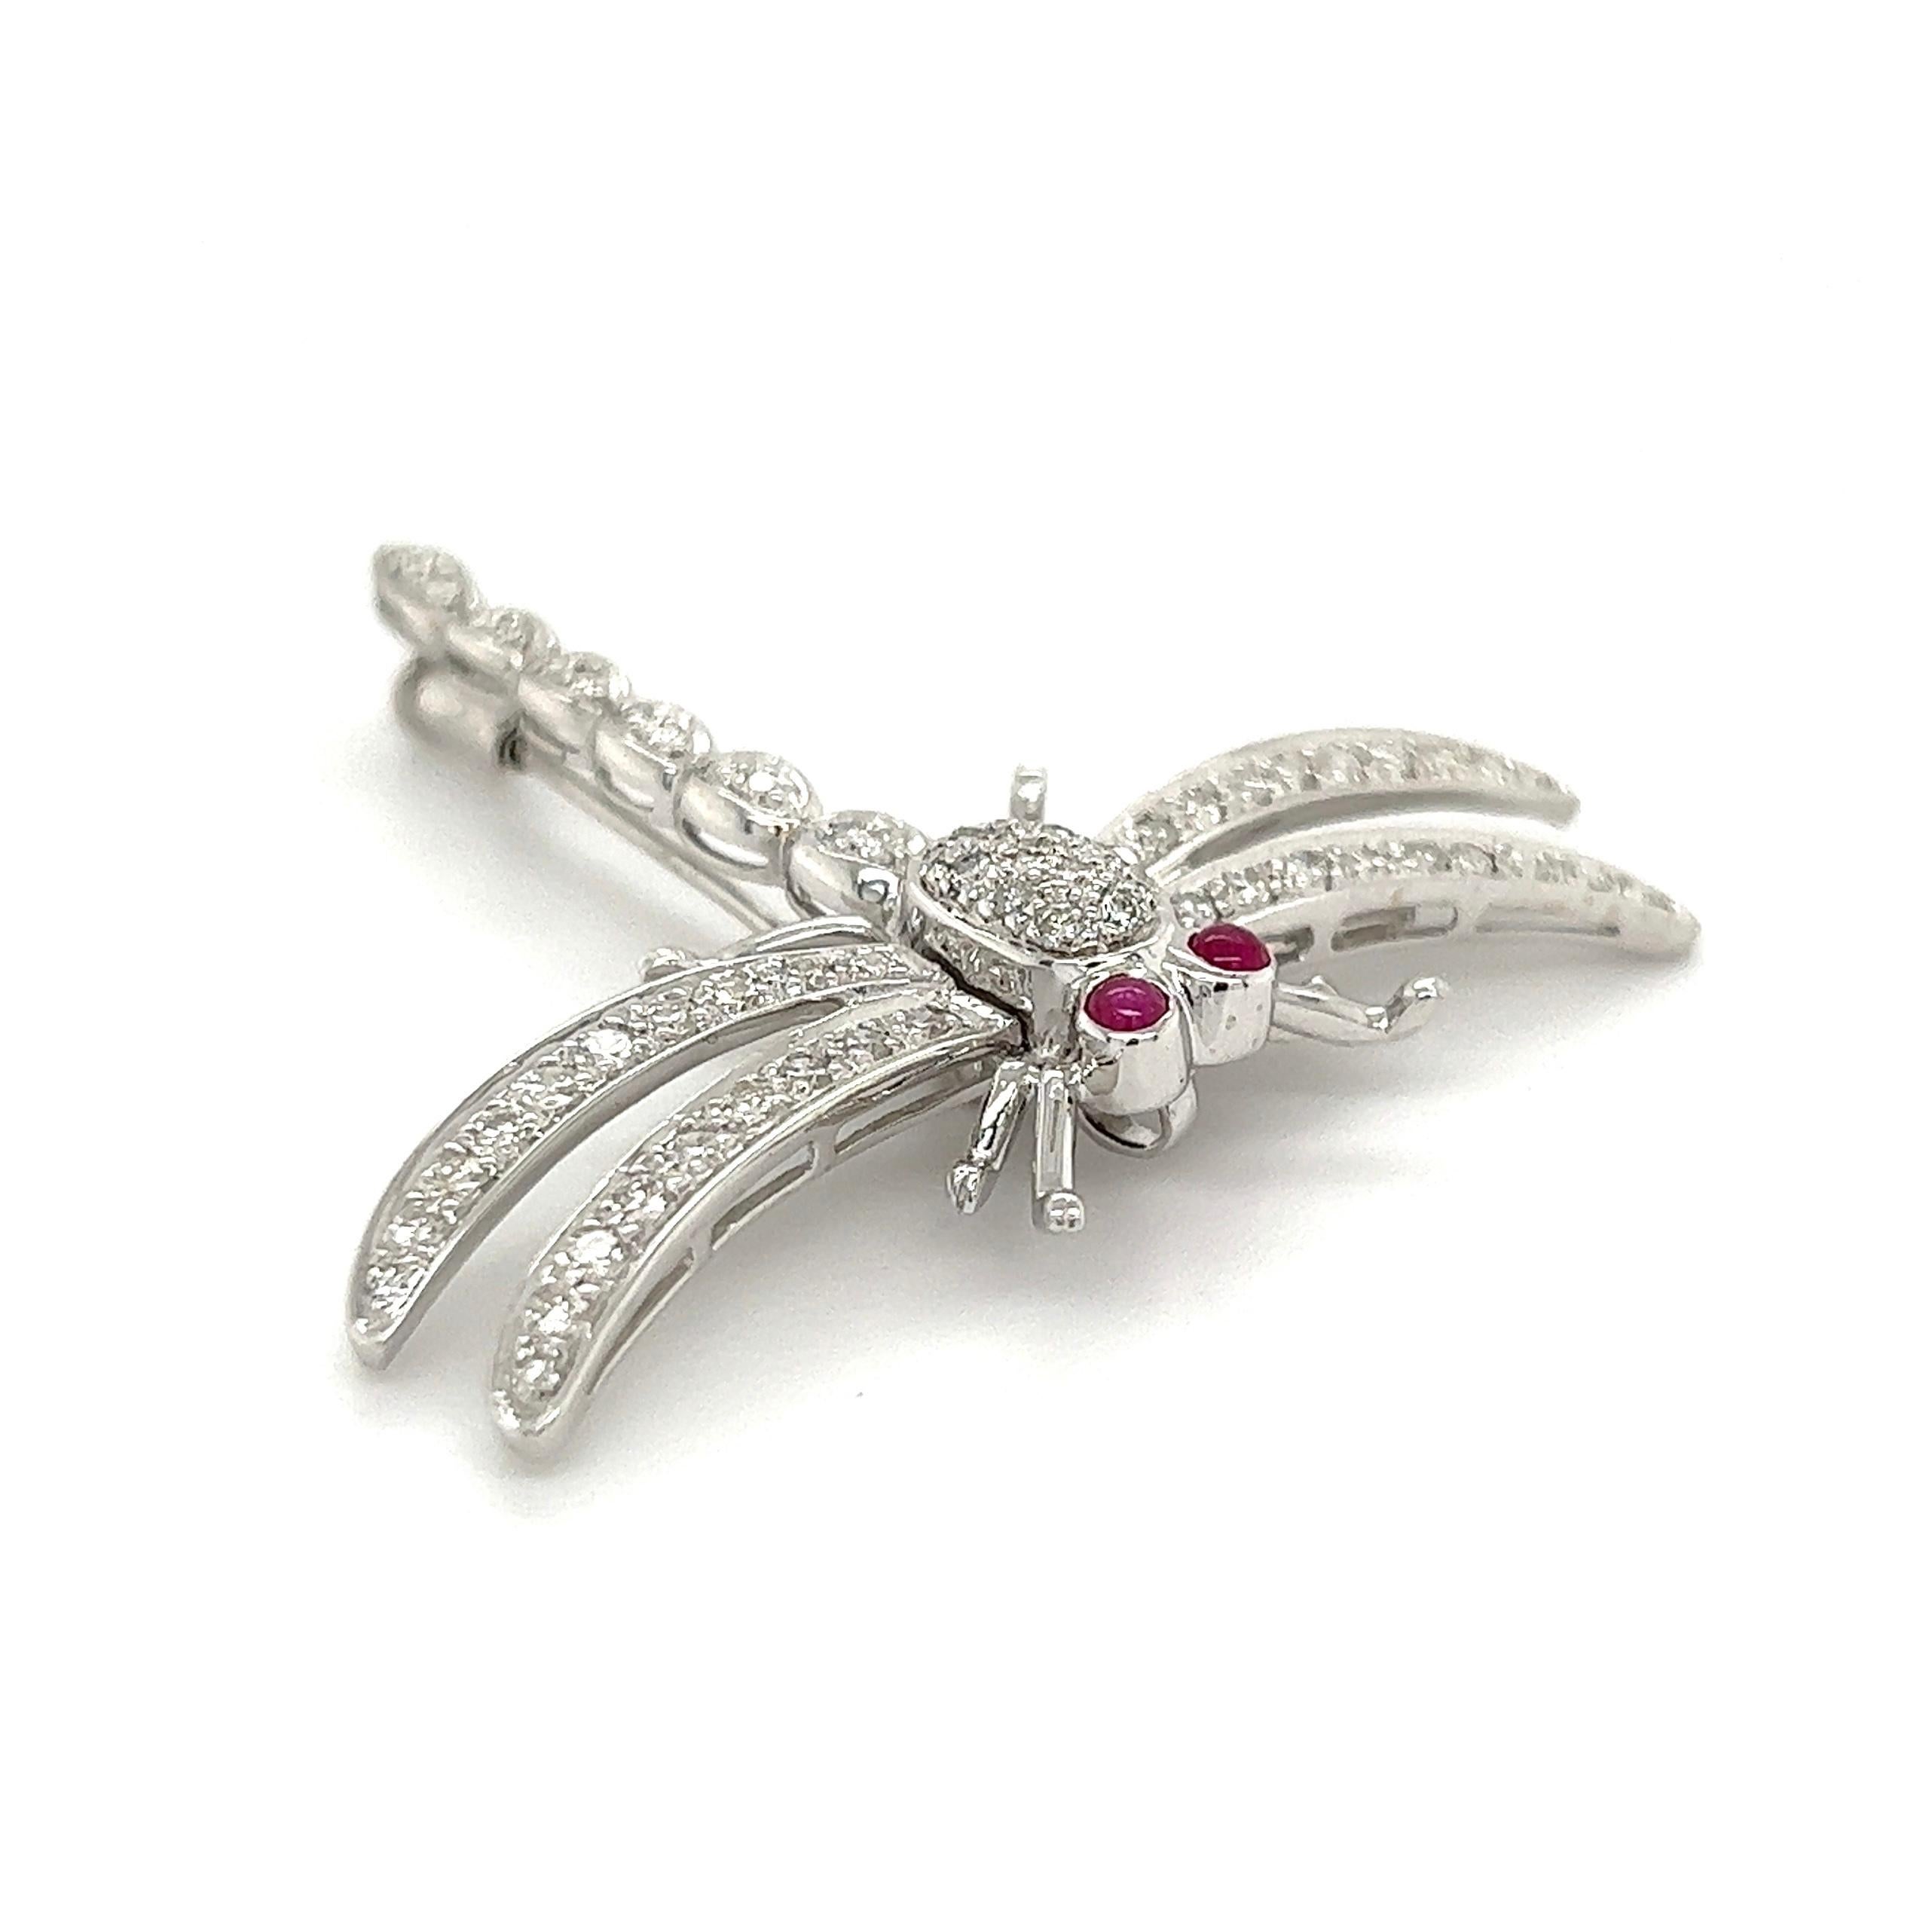 Simply Beautiful! Diamond Dragonfly with Ruby Eyes Brooch. Encrusted with Hand set Diamonds, weighing approx. 1.00tcw, Hand crafted in 18 Karat White Gold. Approx. size: 1.75” tall. This pin is in excellent vintage condition and recently